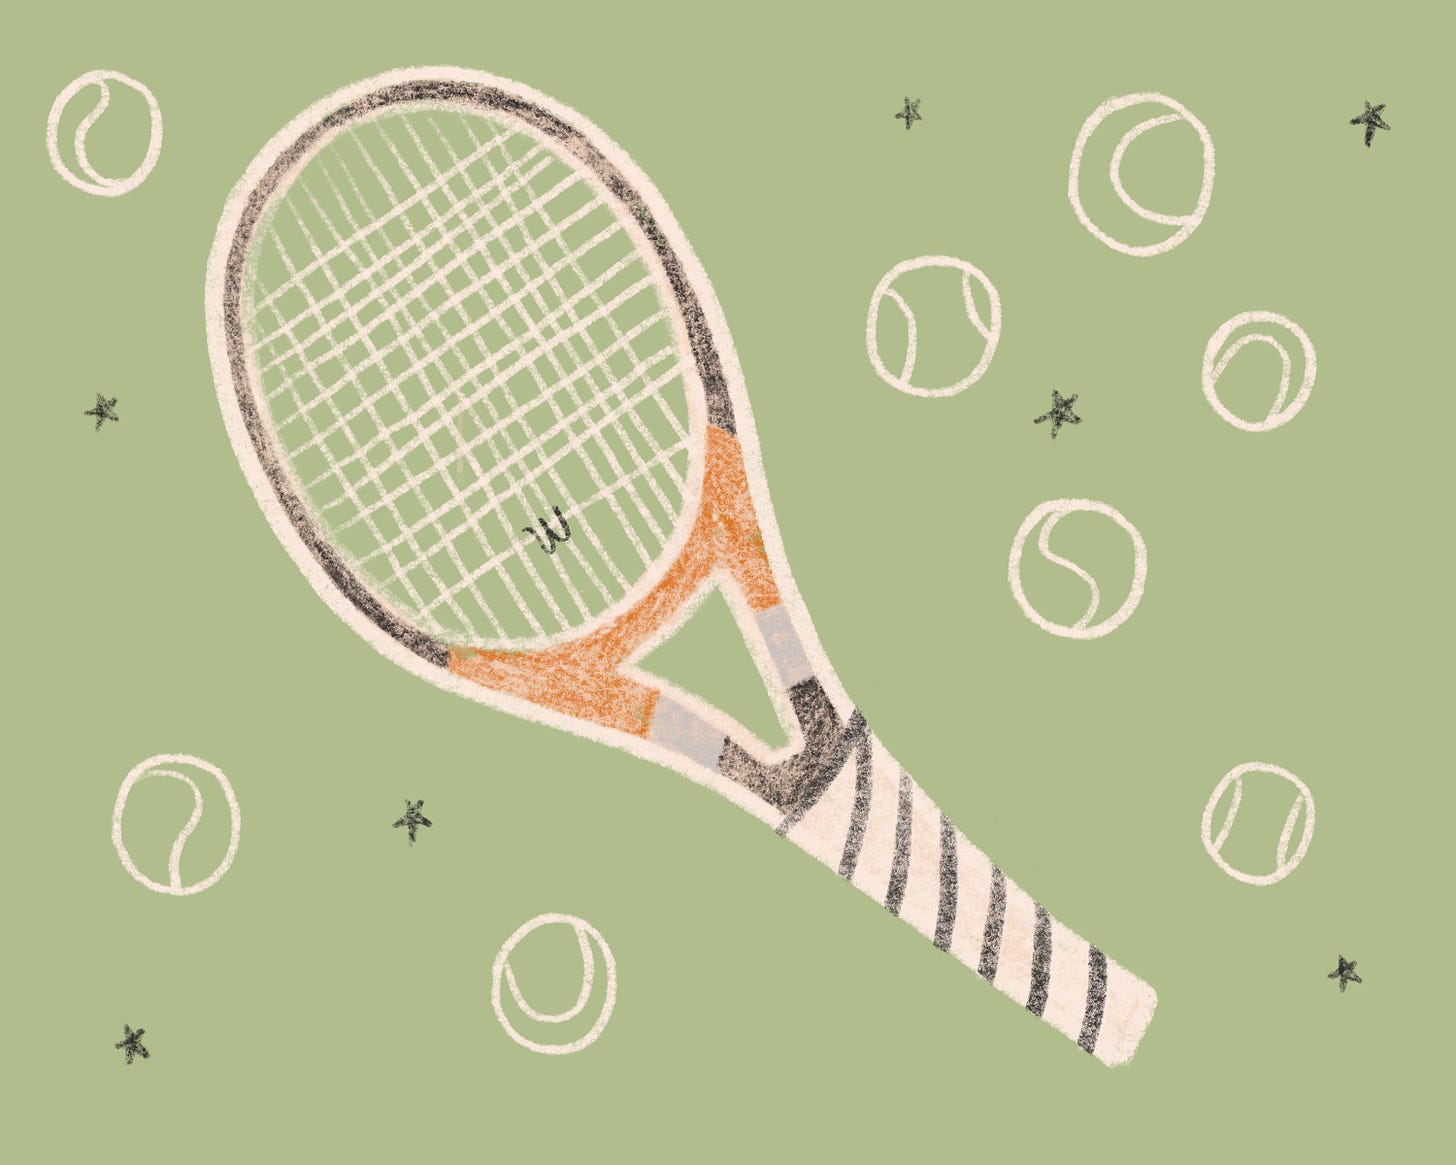 a cream, black and orange tennis racket with white strings and white grip tape floating on a light green background. in the background are black stars twinkling and the outlines of tennis balls in cream